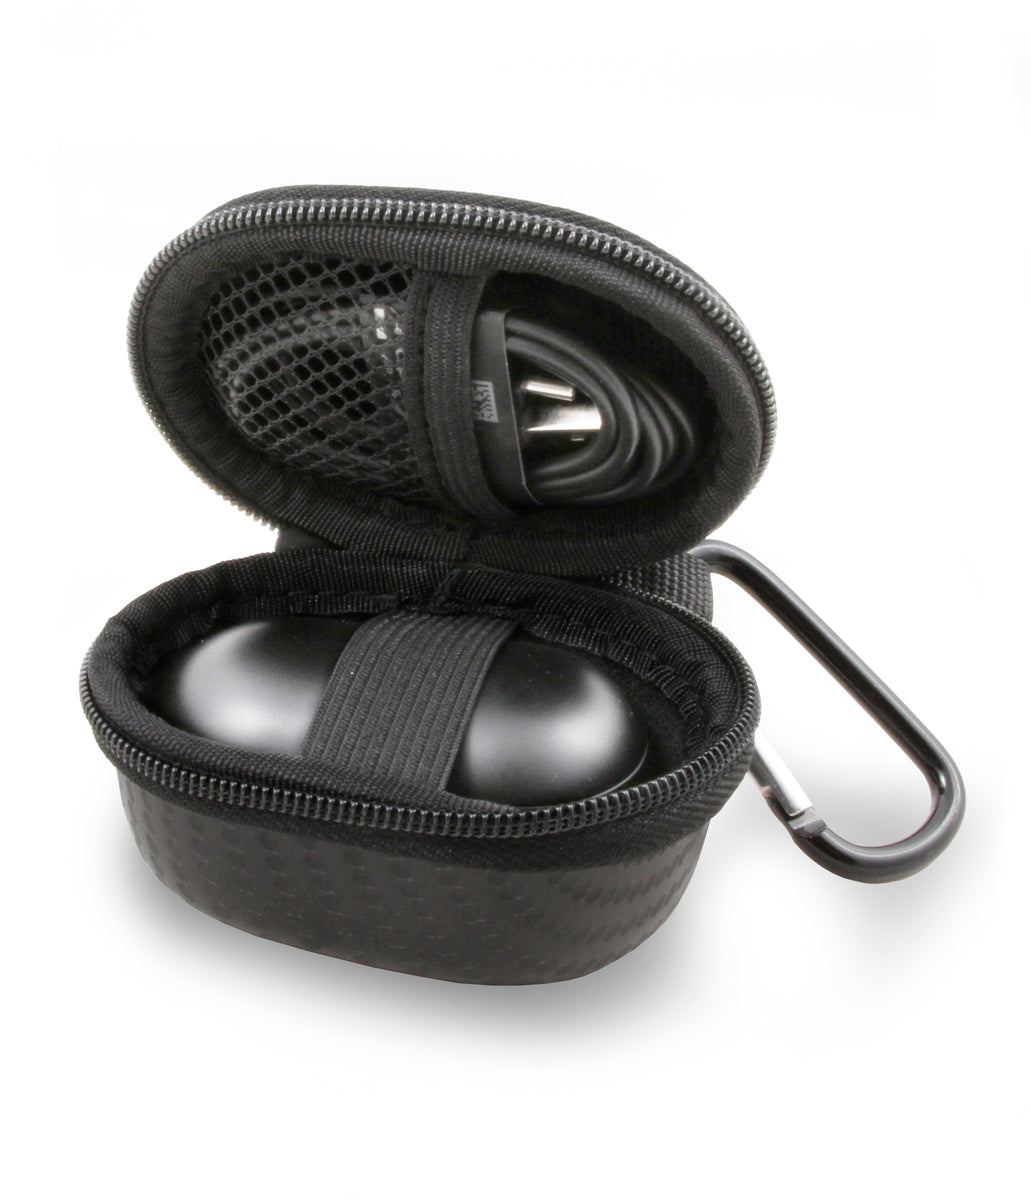 Premium Galaxy Buds Case - Full Protection, Wireless Charging & More!